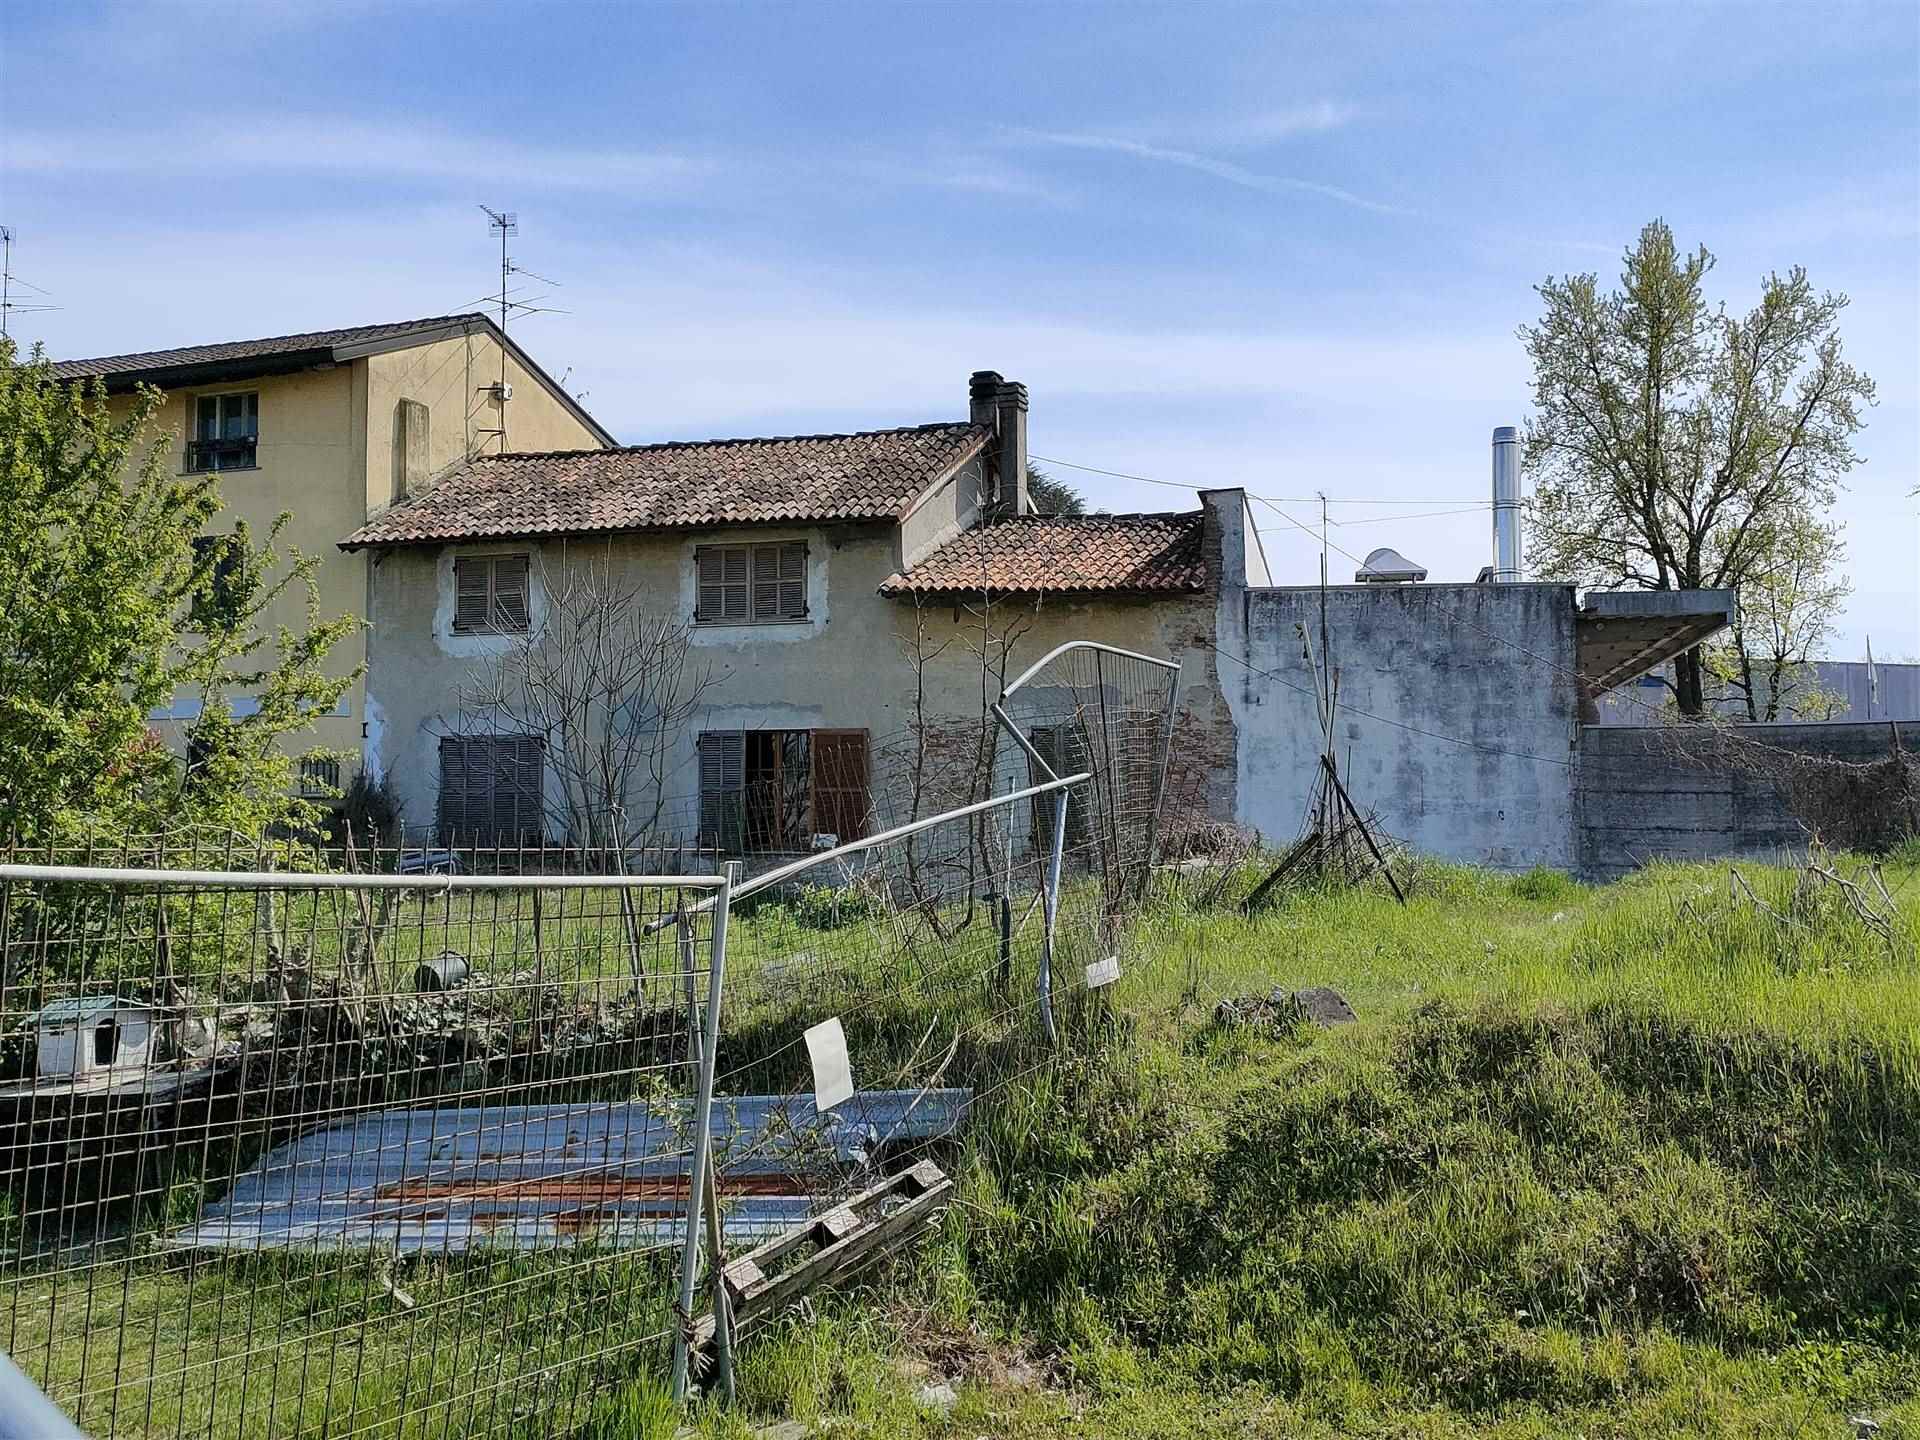 SEMICENTRO, LODI, Semi detached house for sale of 160 Sq. mt., Habitable, Heating Individual heating system, Energetic class: G, placed at Ground, 